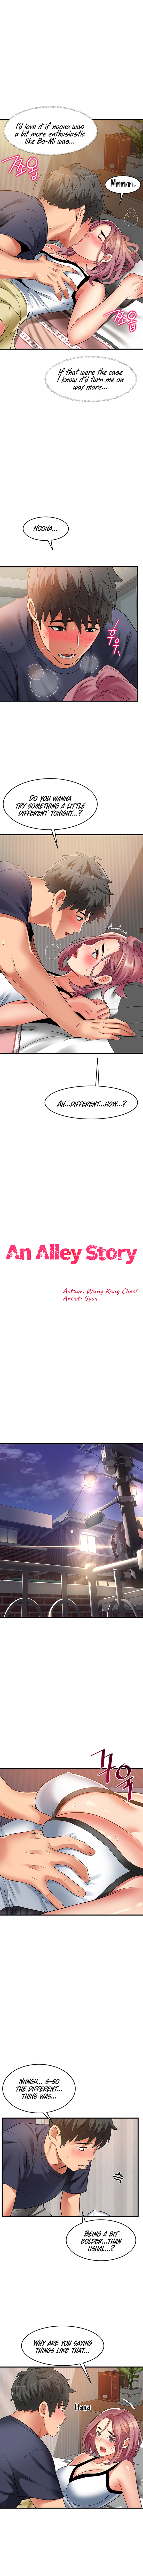 An Alley story image